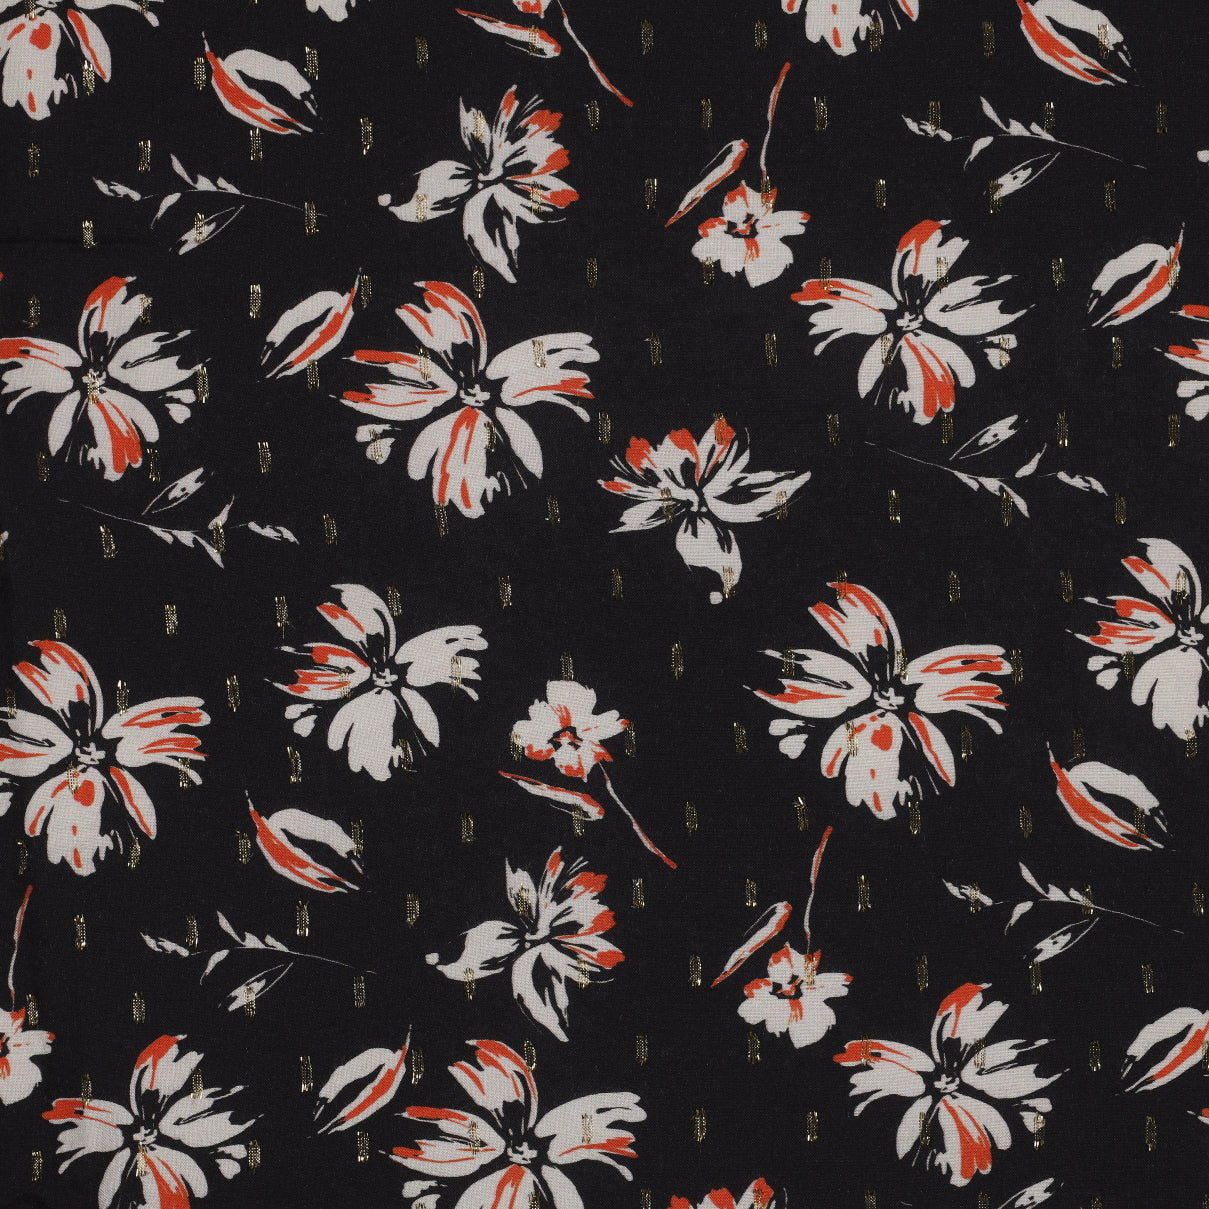 Flowers on Black with Lurex Viscose Fabric